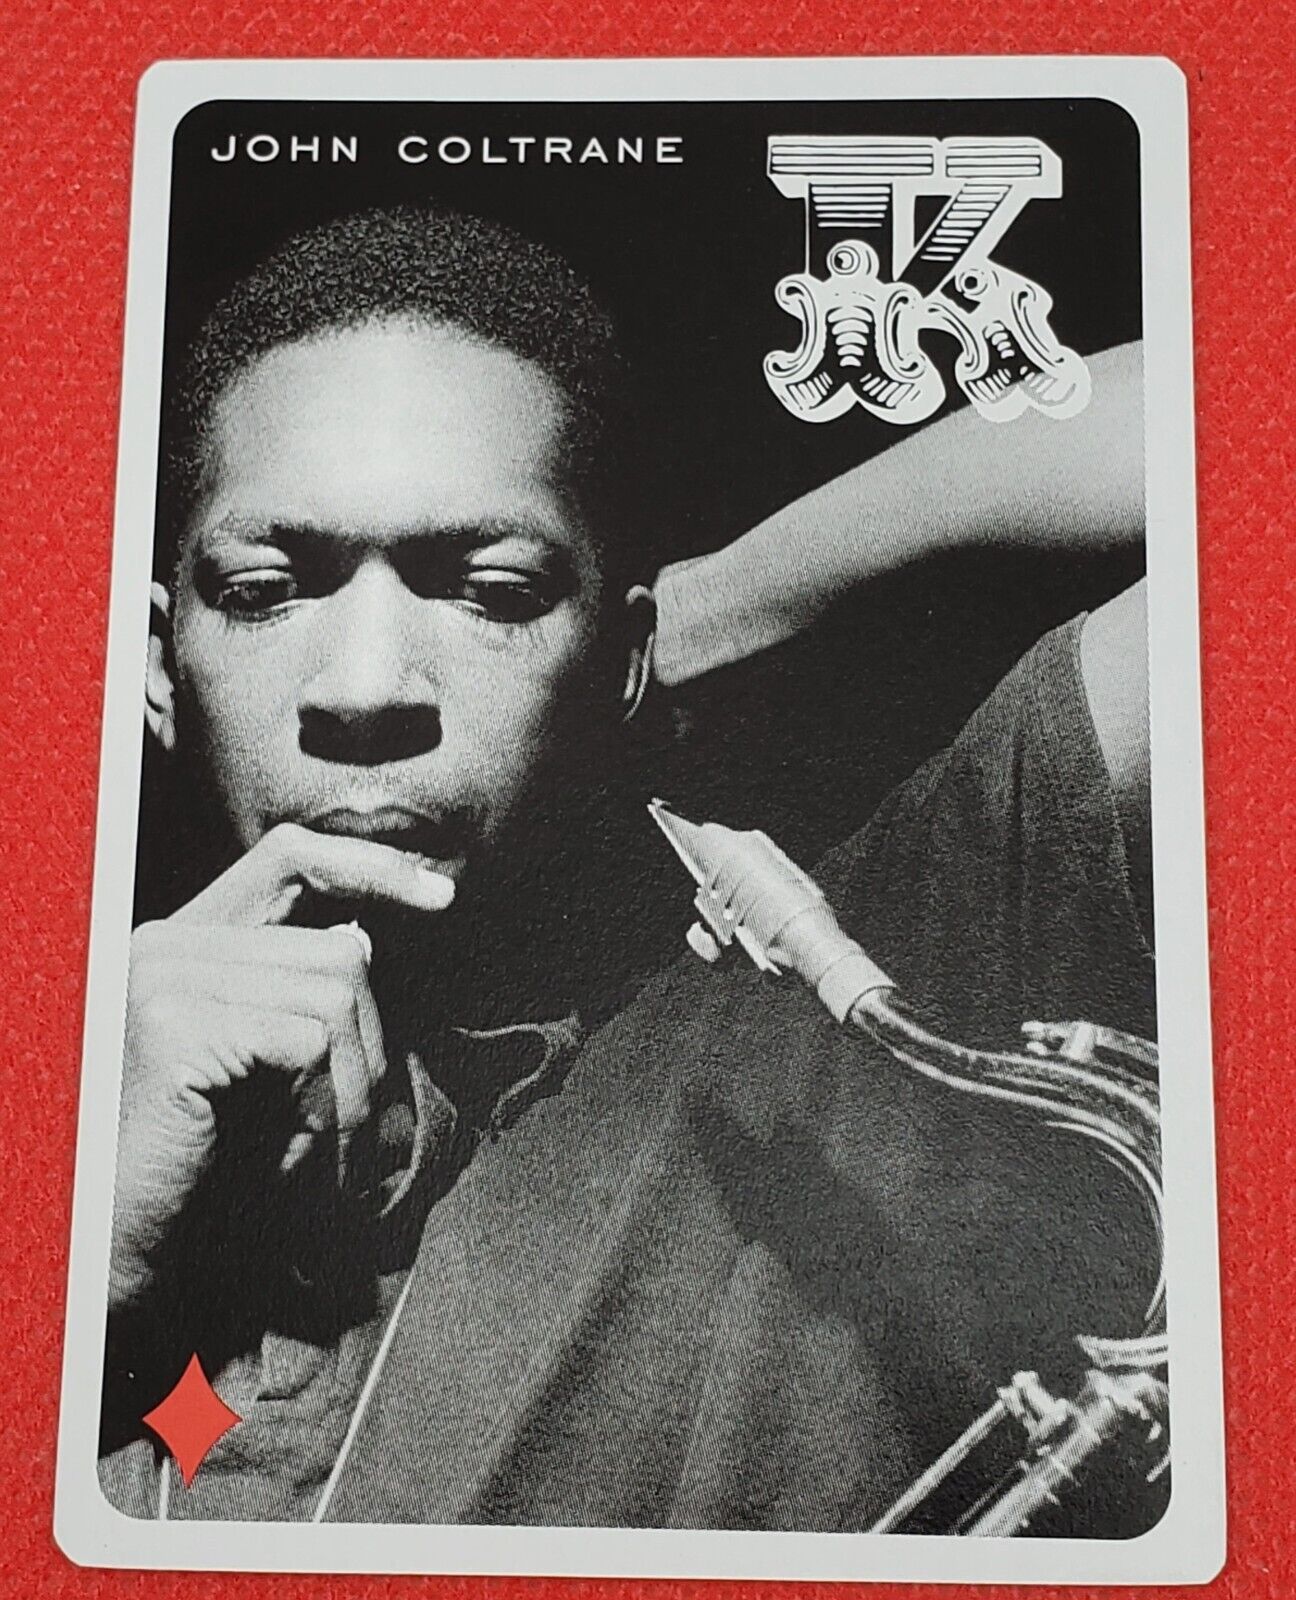 John Coltrane Rare Capitol Records Music Promotional Playing Trading Card